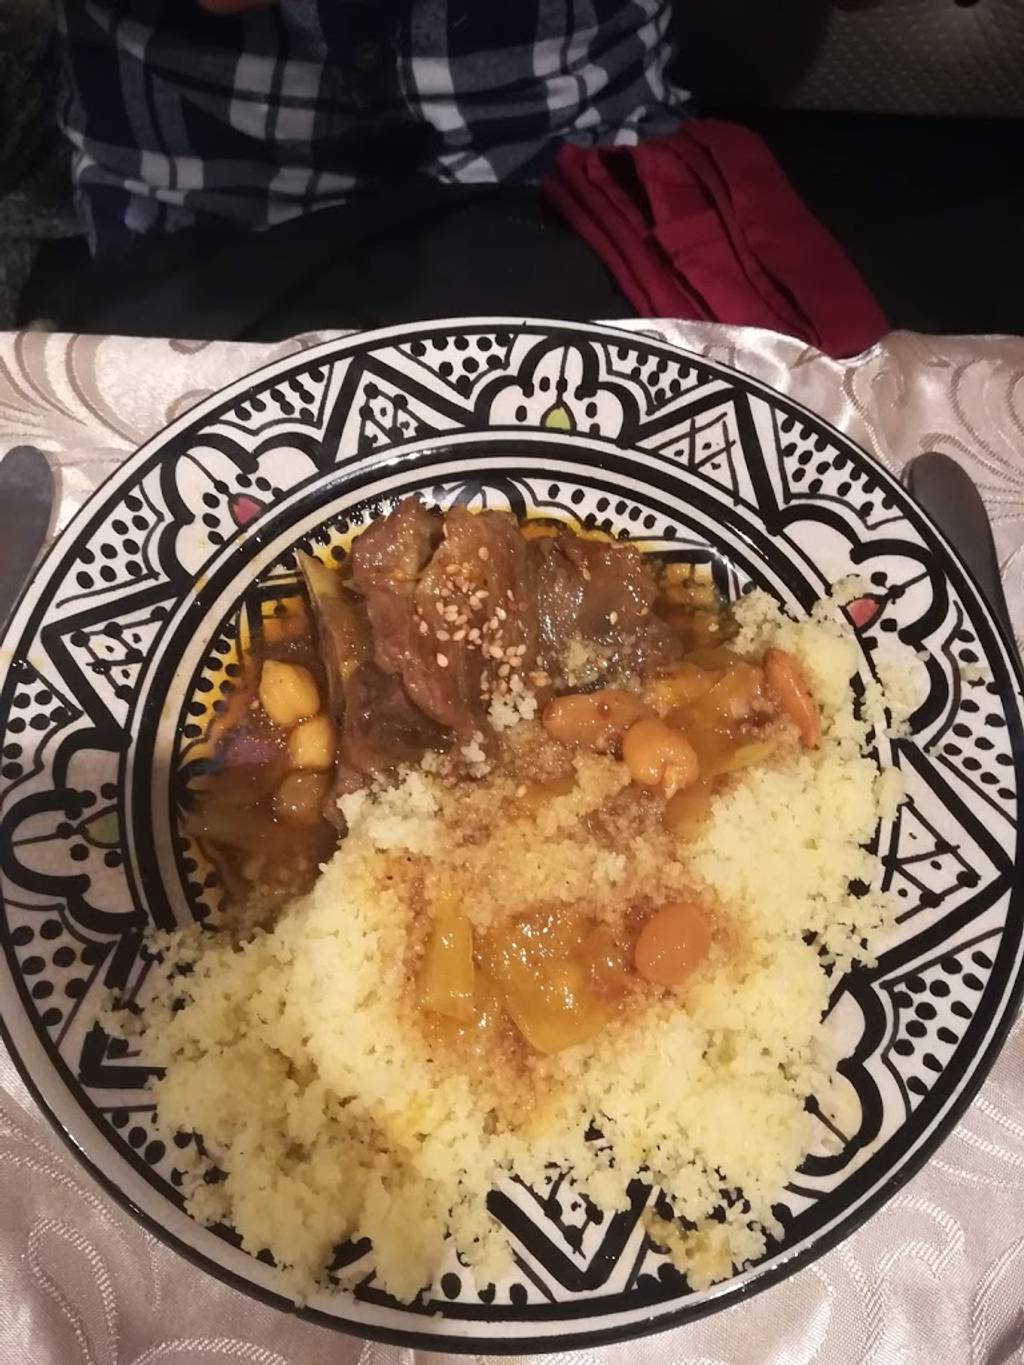 Tafraout Marocain Le Plessis-Bouchard - Dish Food Cuisine Ingredient White rice